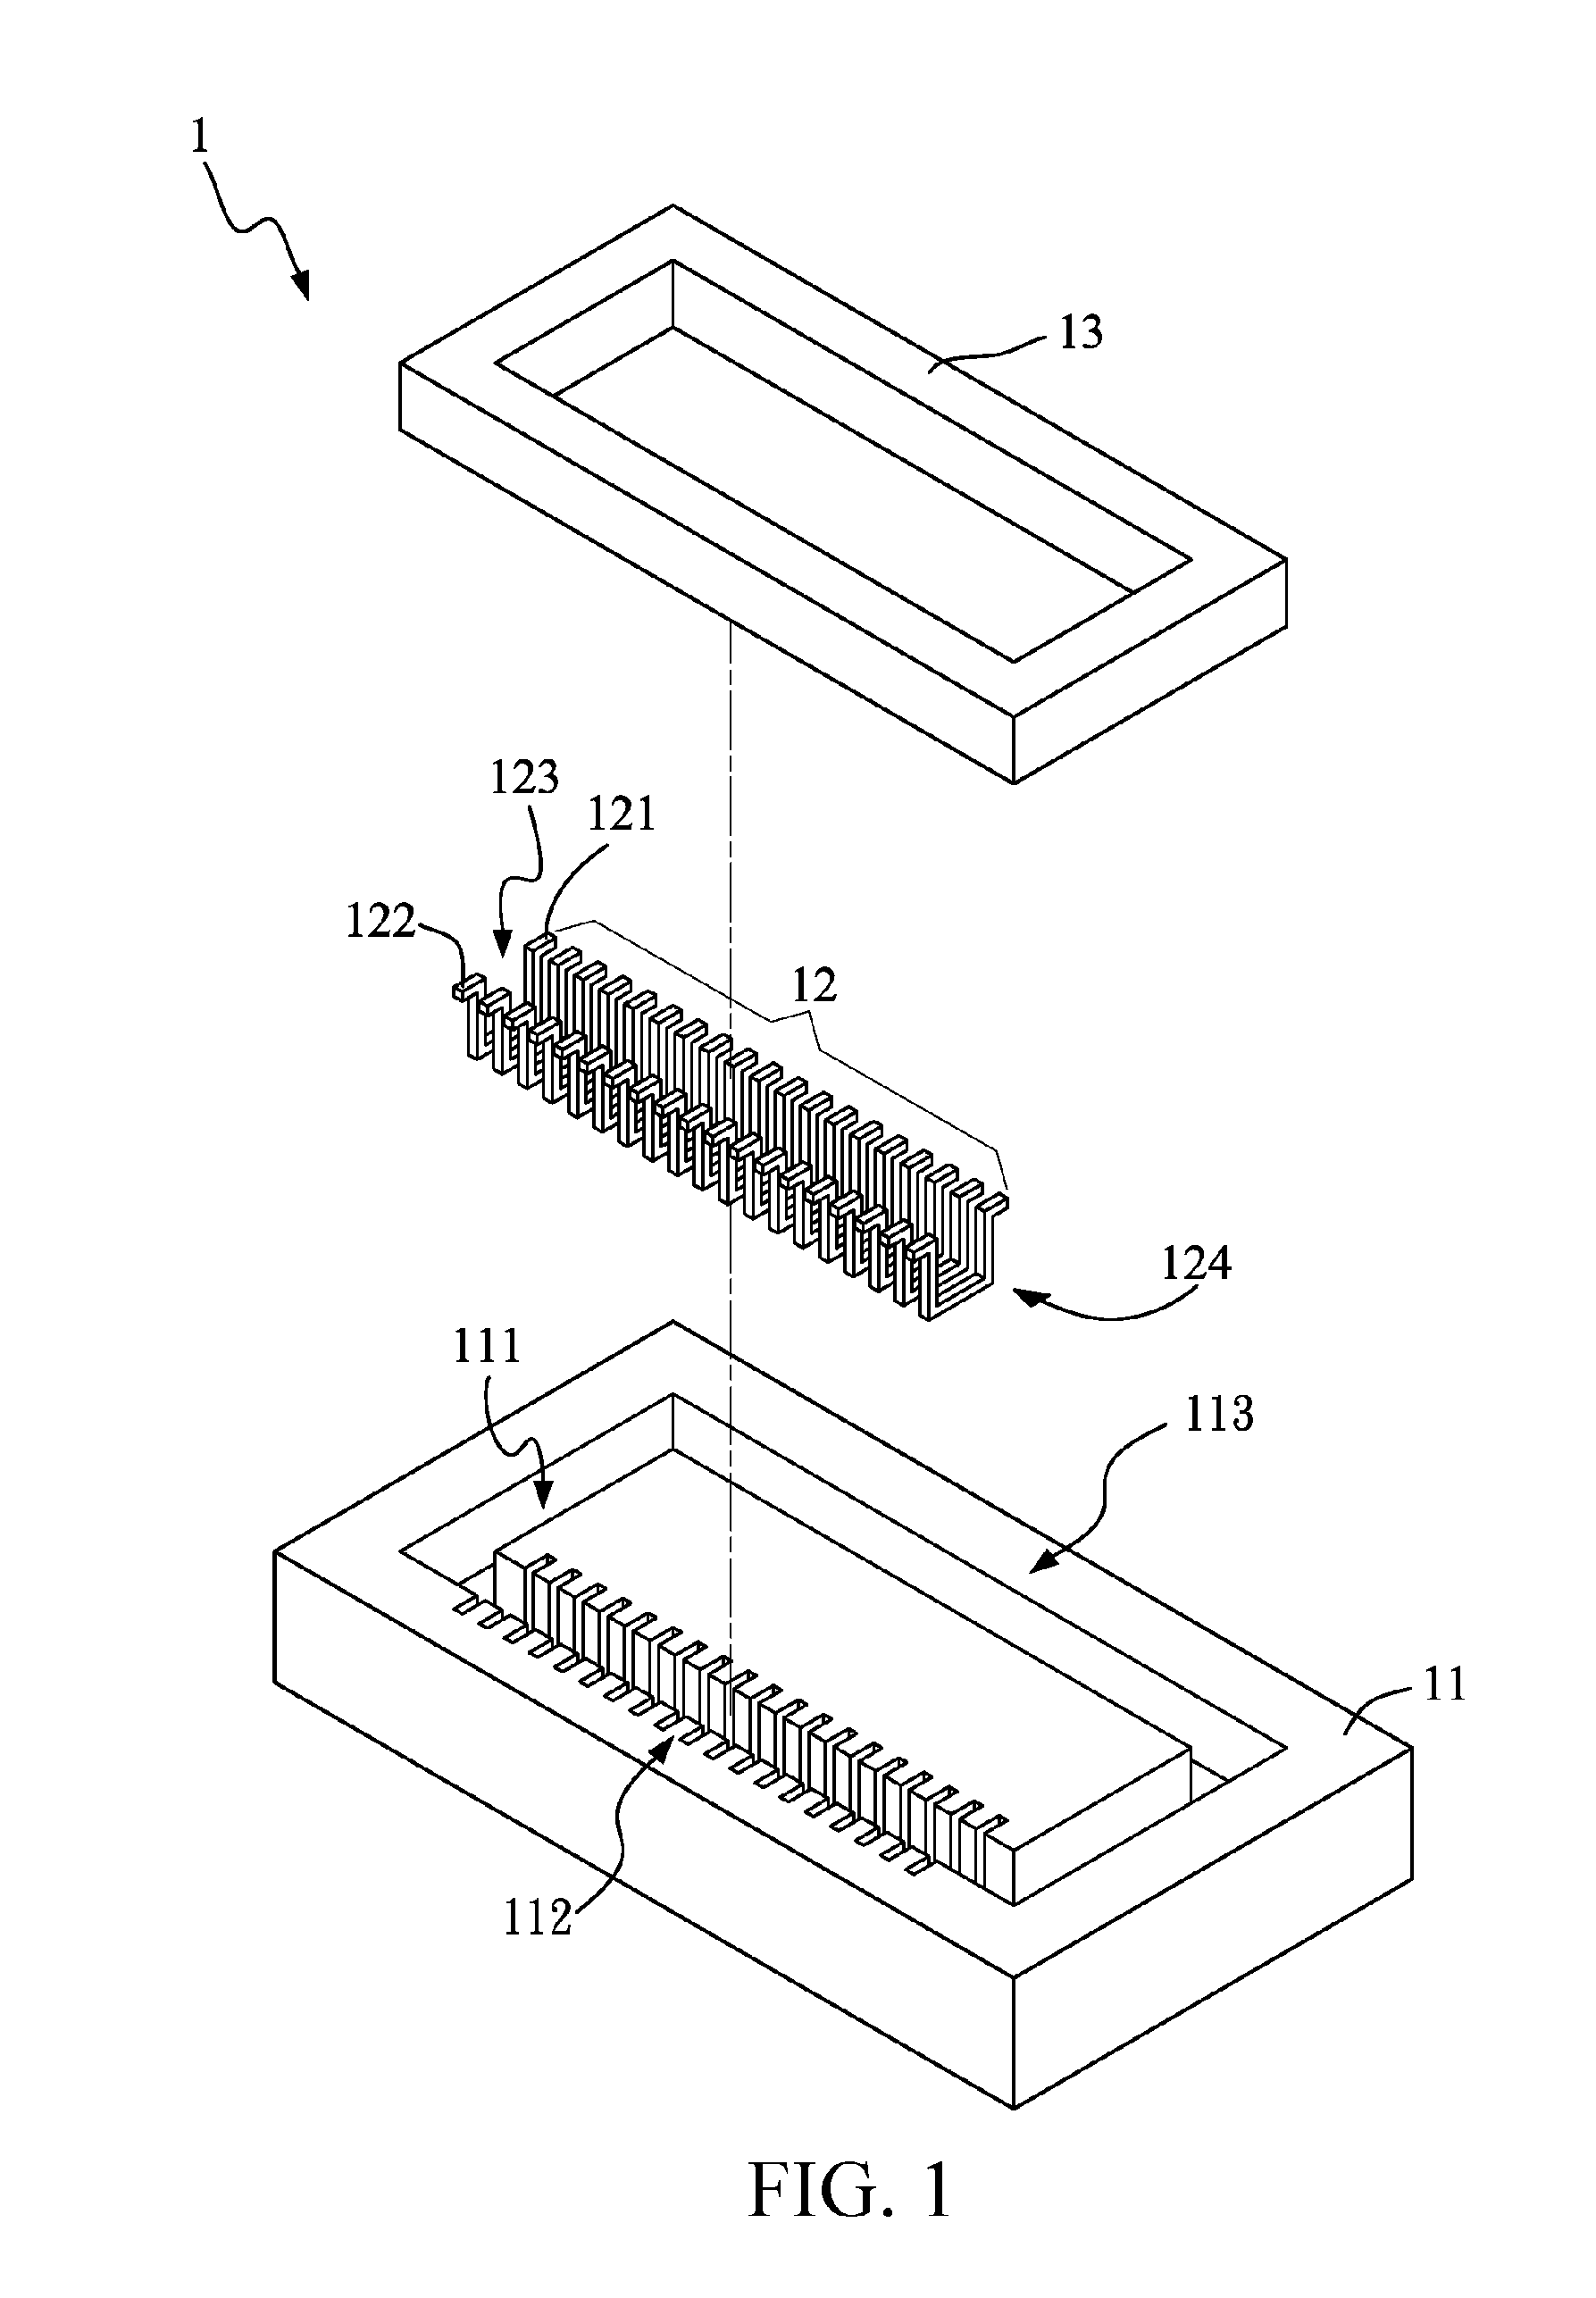 Iron-core coil assembly